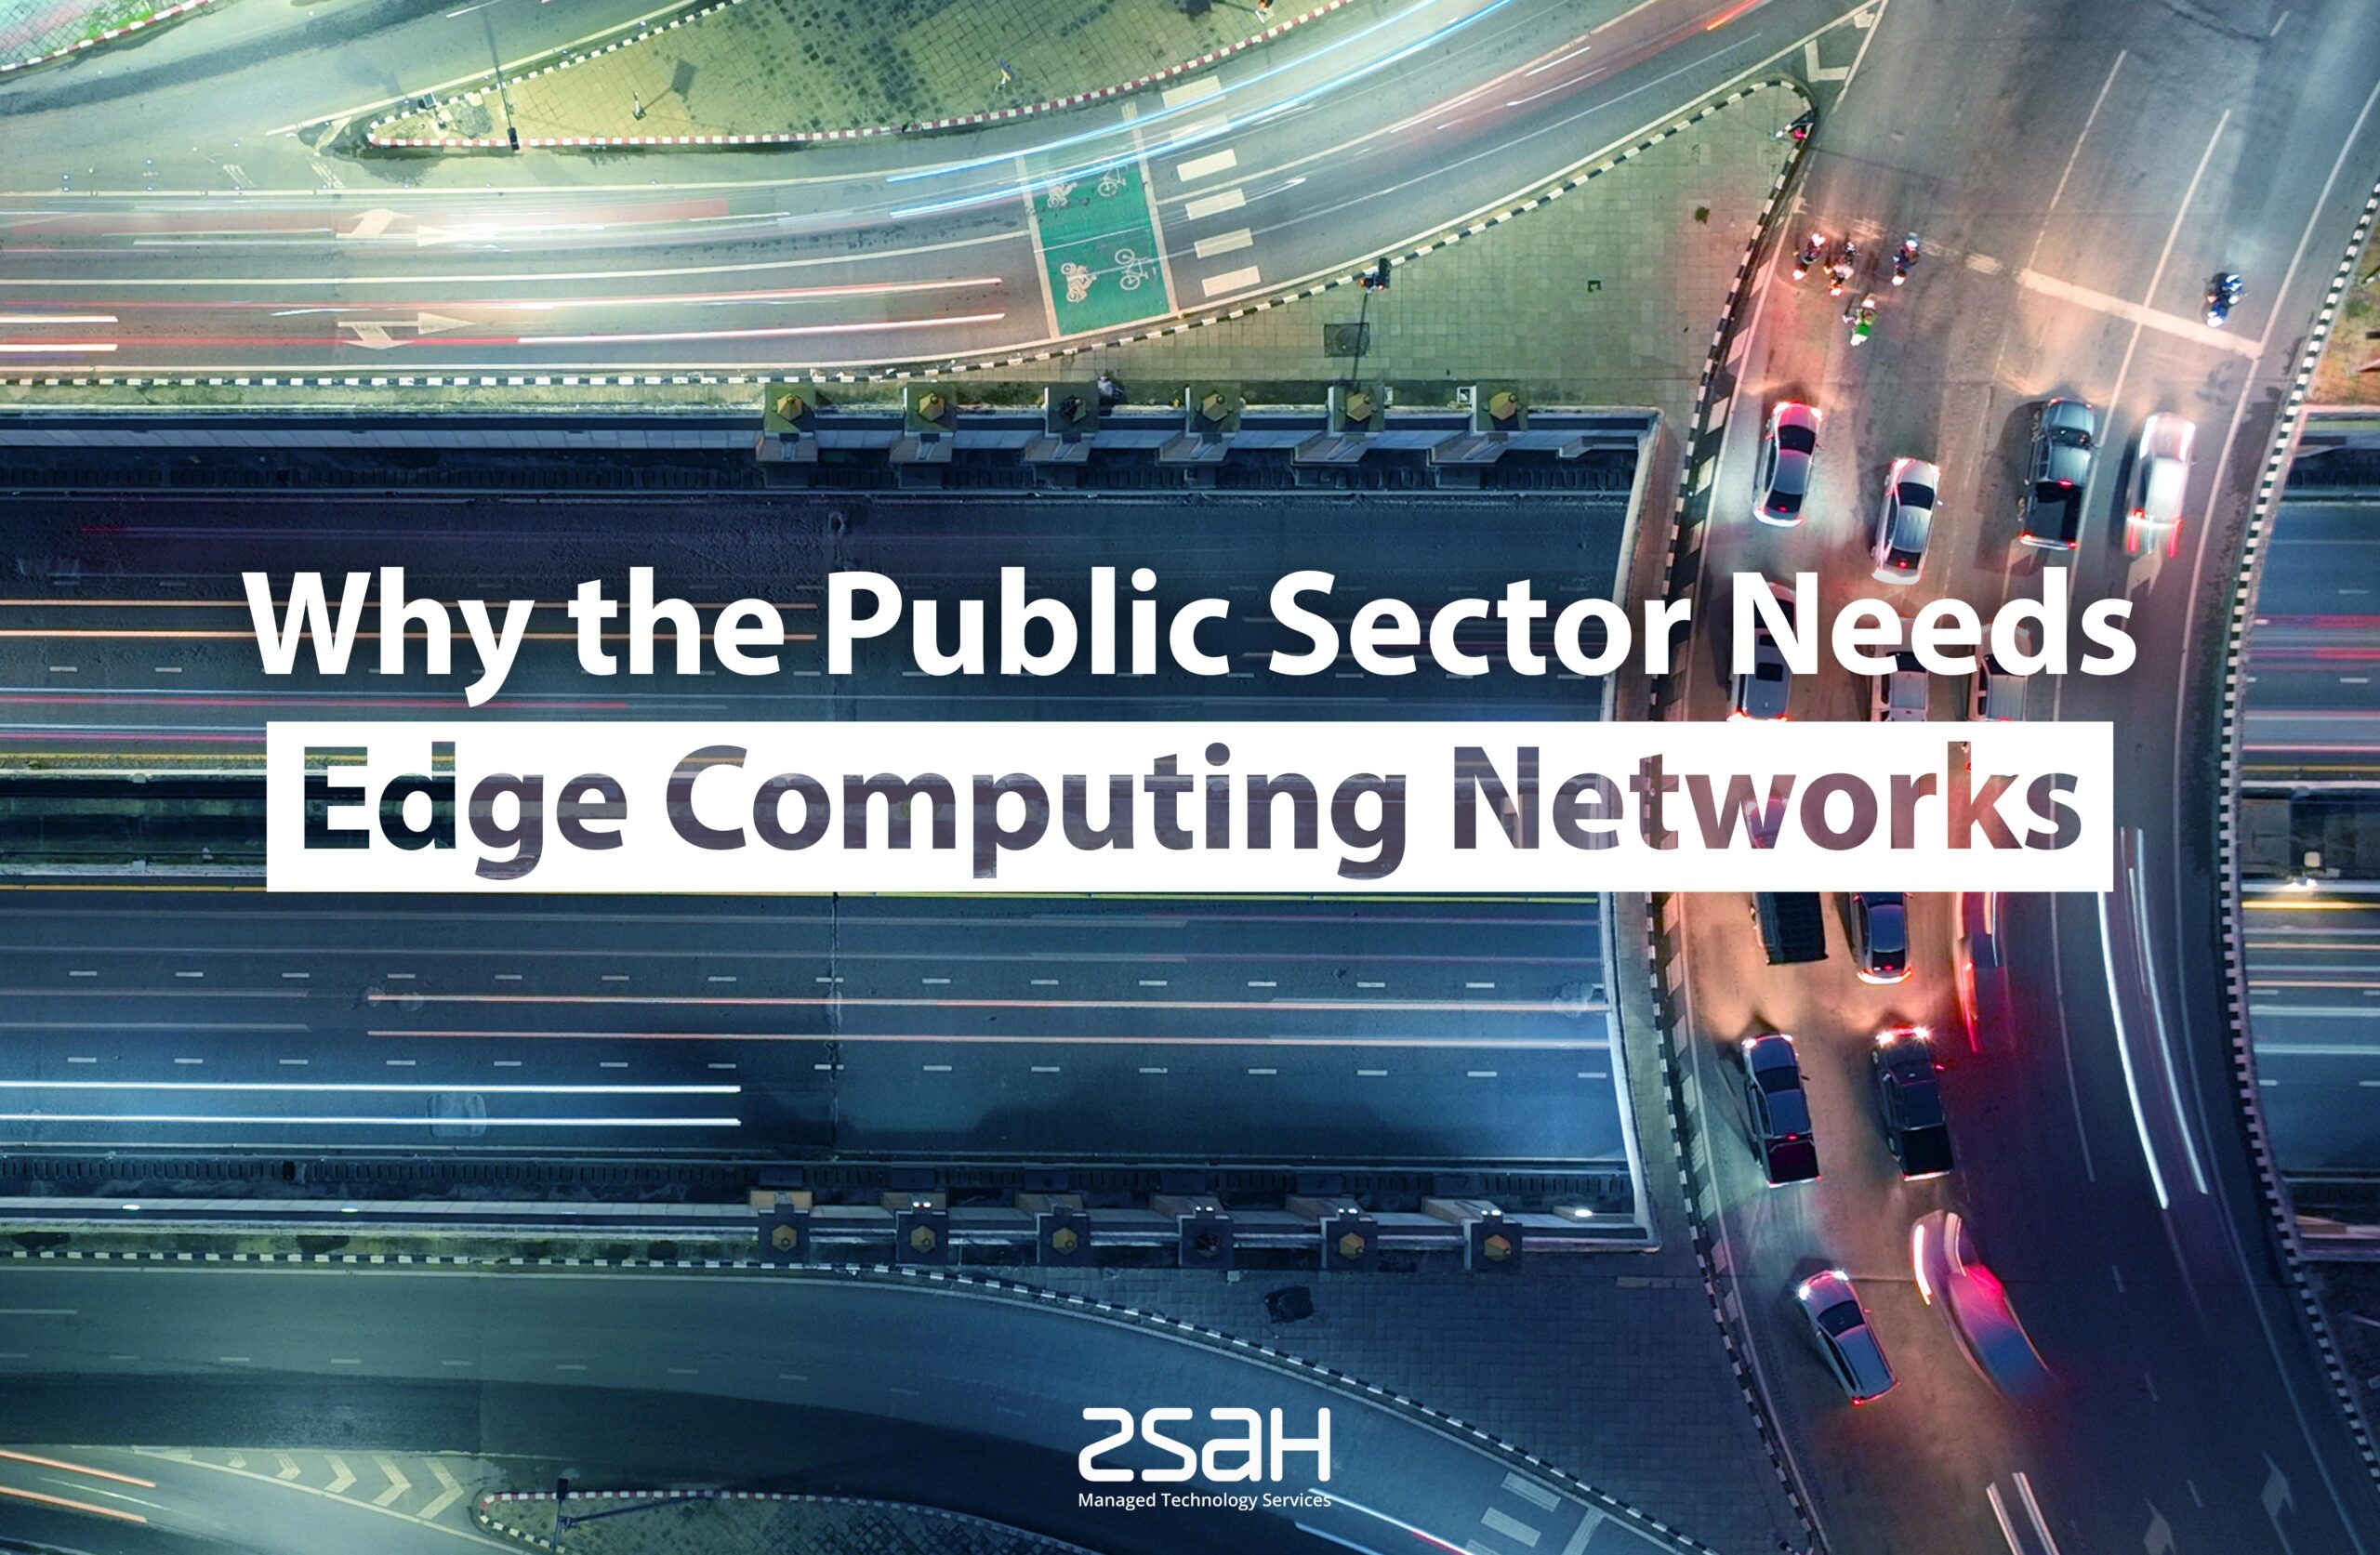 Why the Public Sector Needs Edge Computing Networks